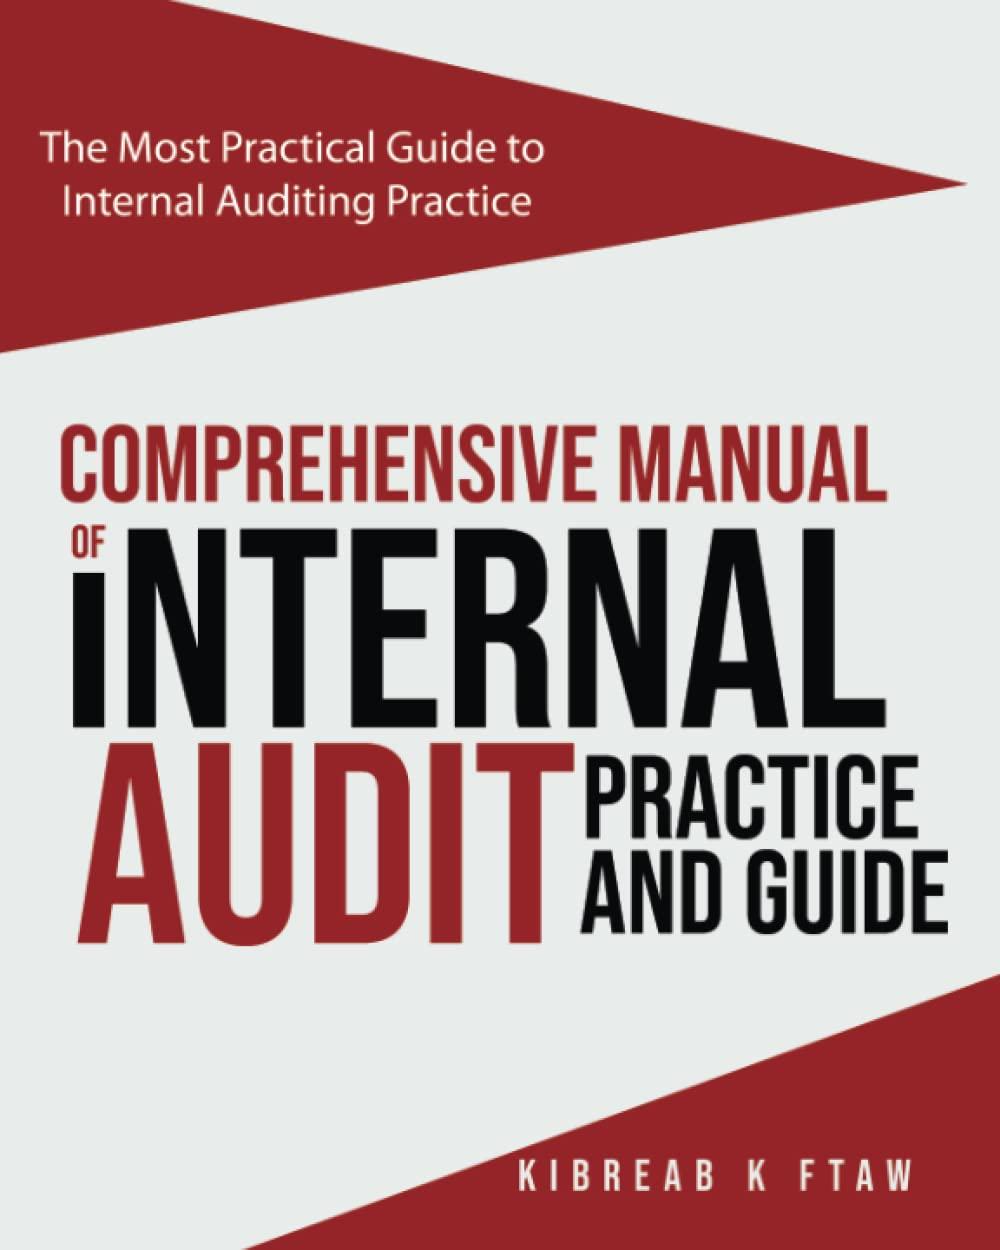 comprehensive manual of internal audit practice and guide the most practical guide to internal auditing